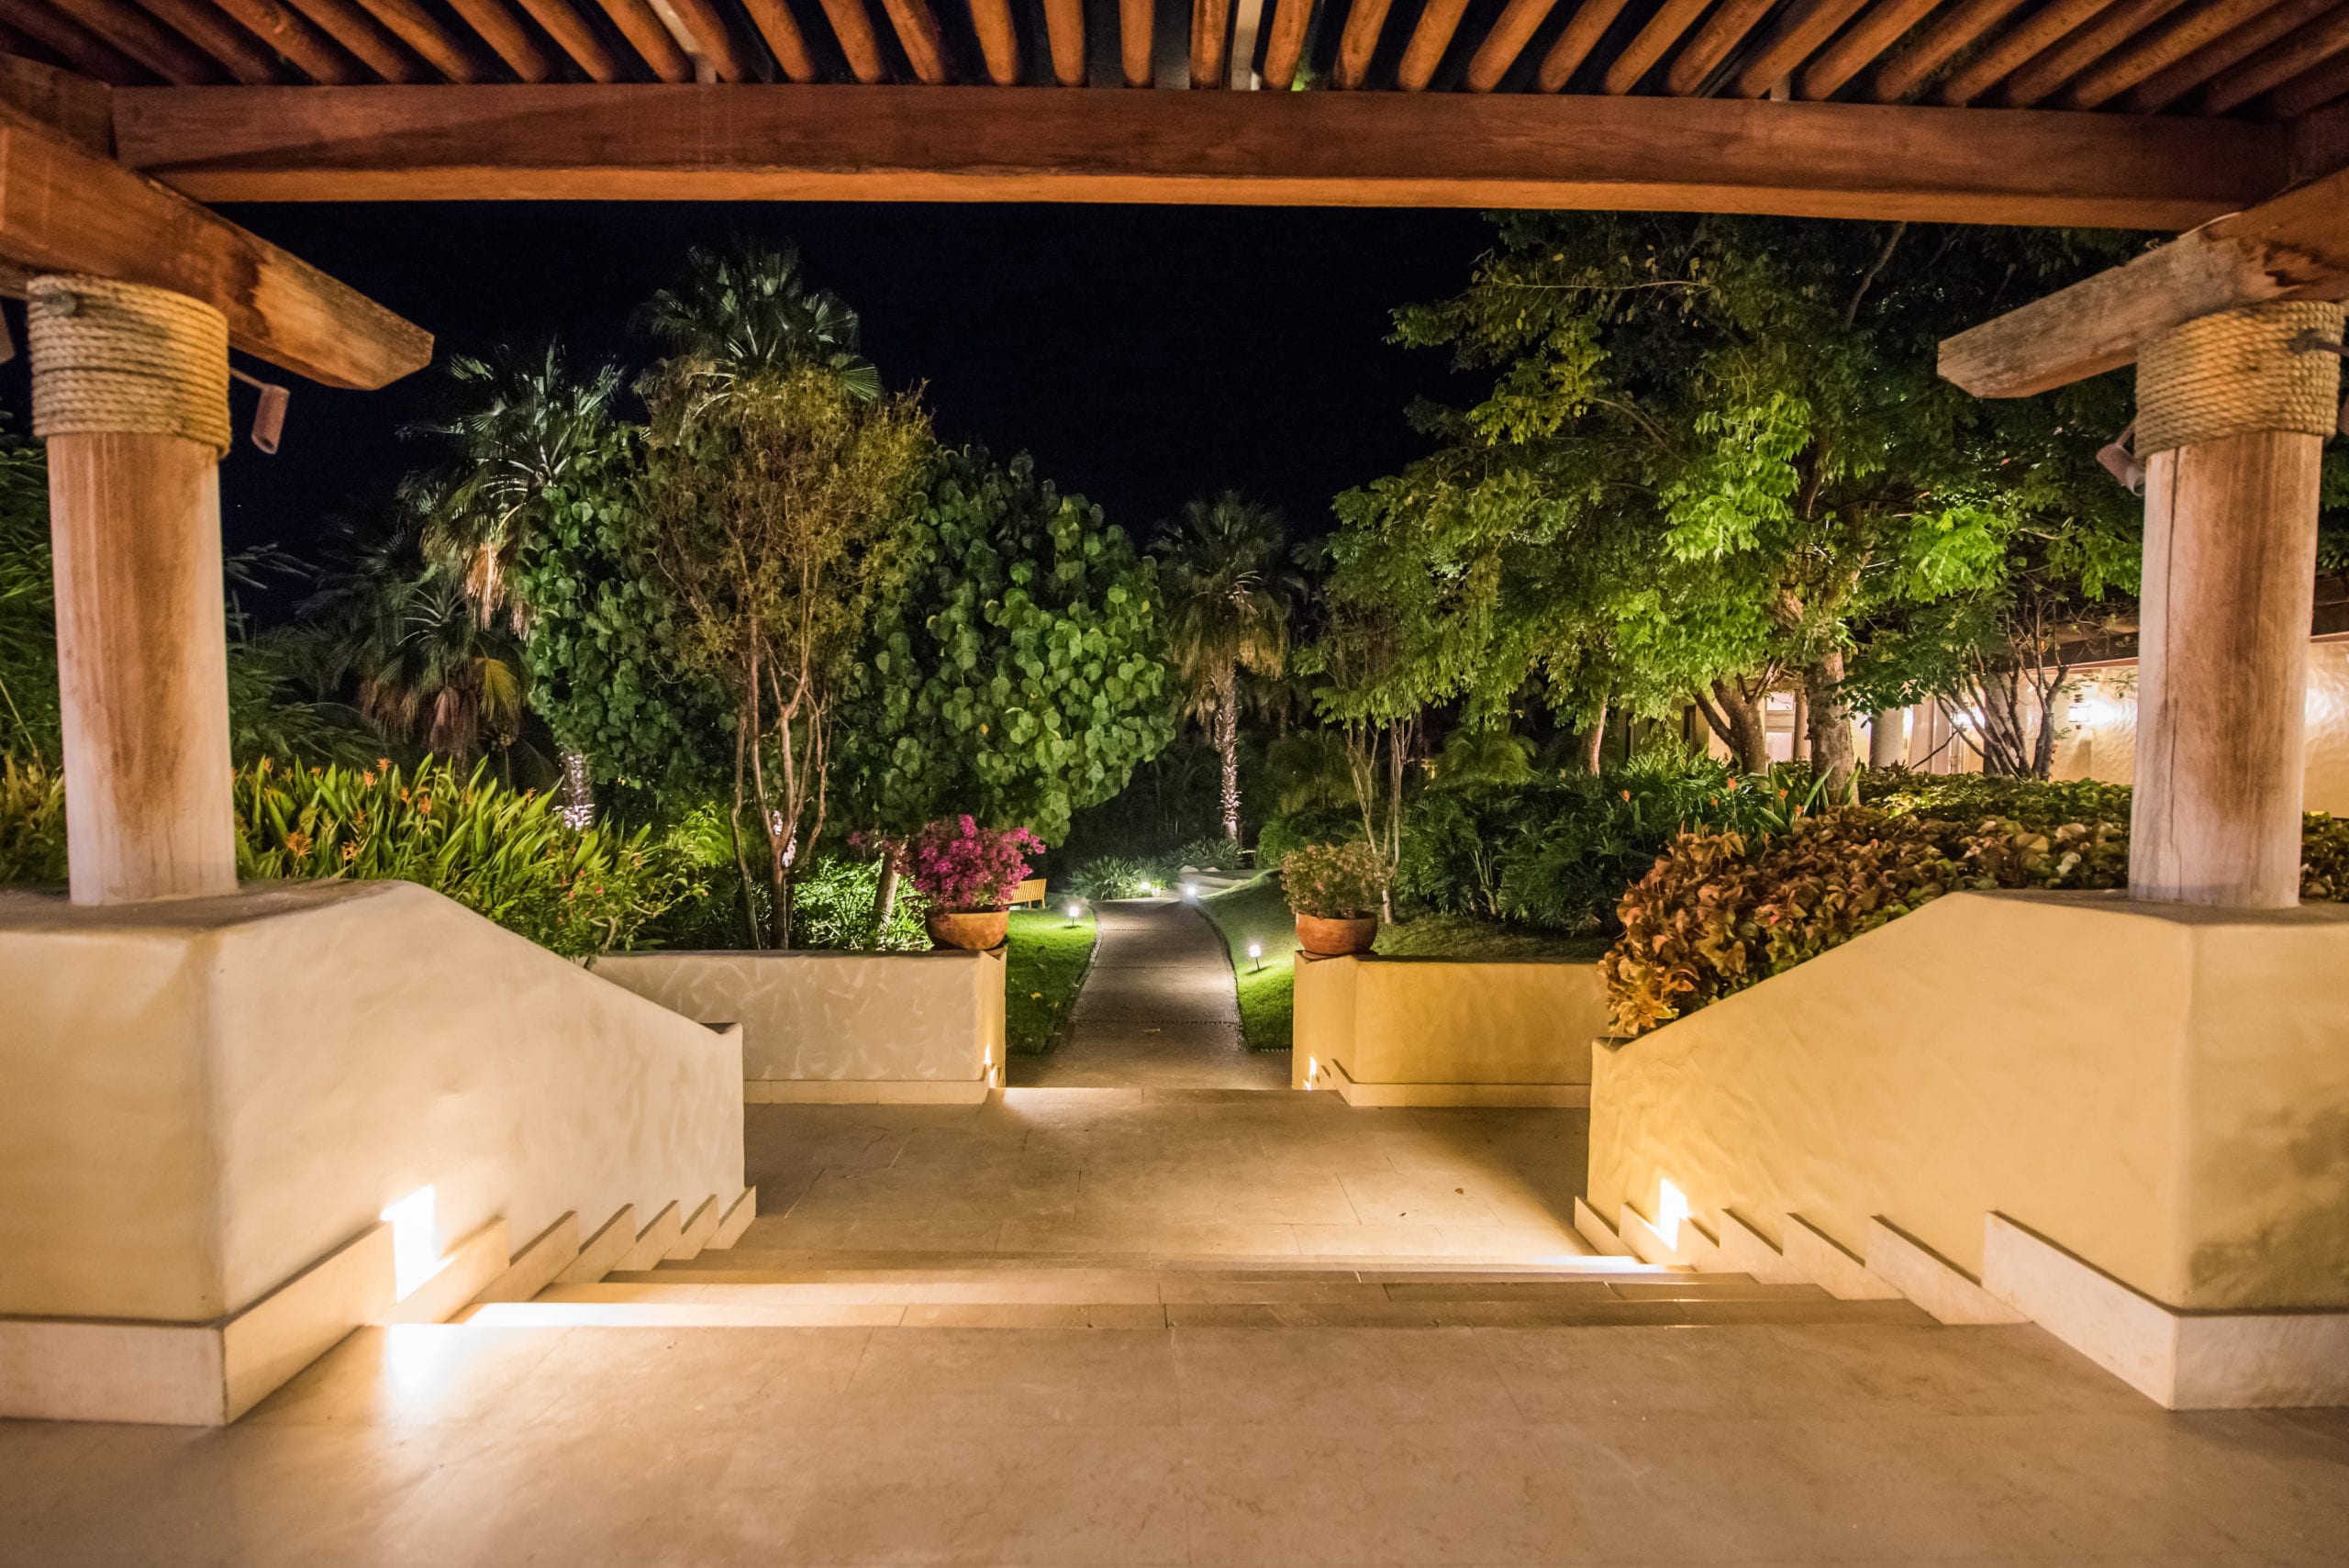 St Regis View of steps going down to walkway with trees and palm trees lit up in the dark